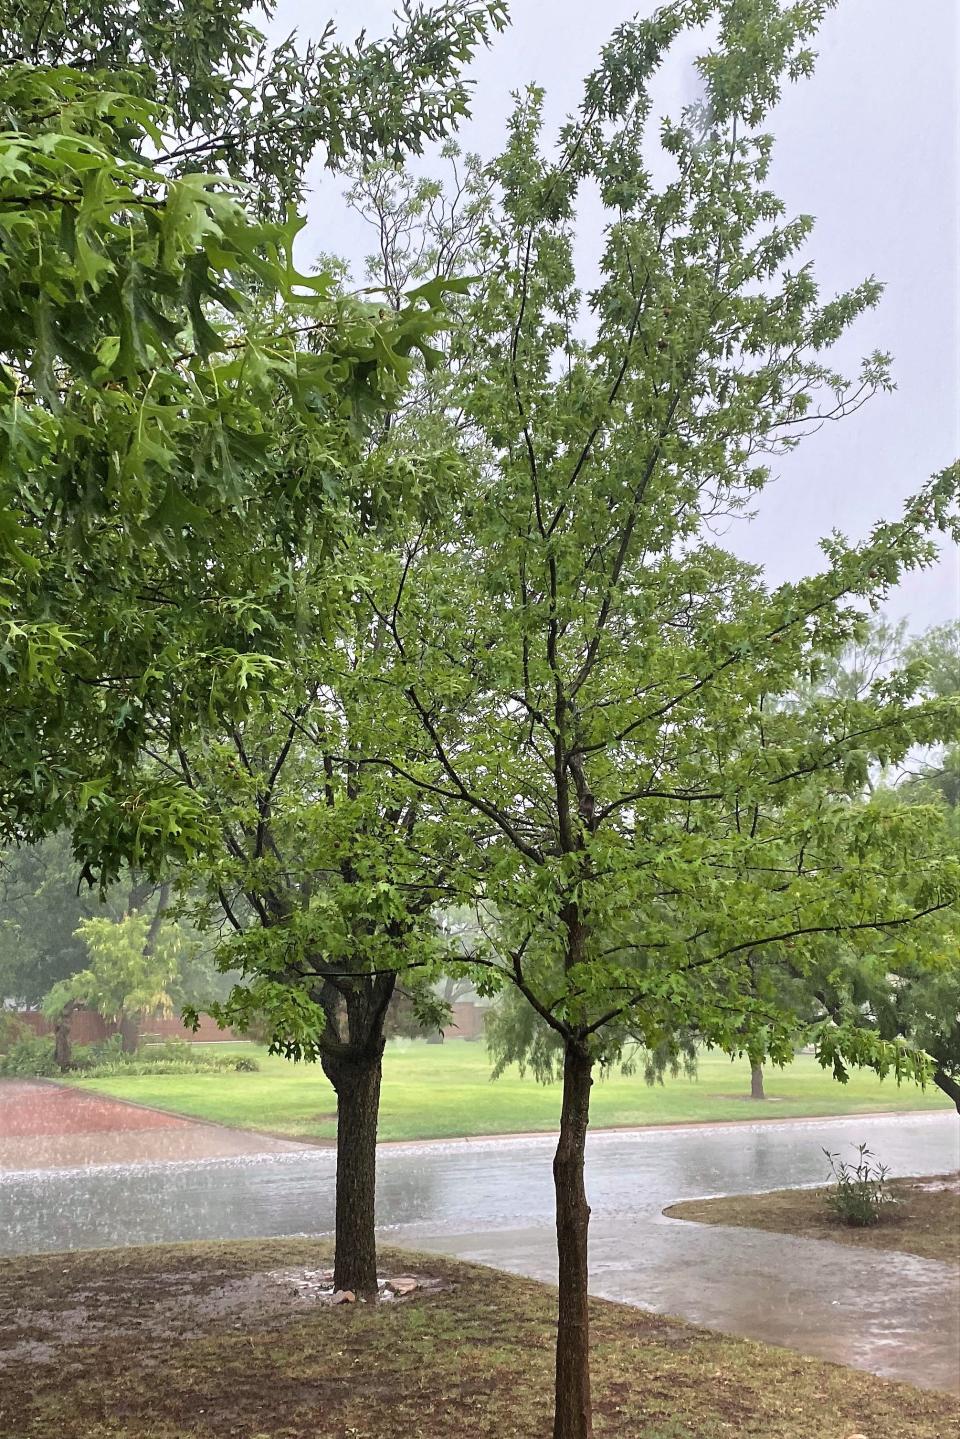 Western areas of Abilene received welcome rainfall Sunday evening, enough to fill street gutters. Other areas of the city got little rain. The cloud cover did drop temperatures into the 80s for a high of 100.